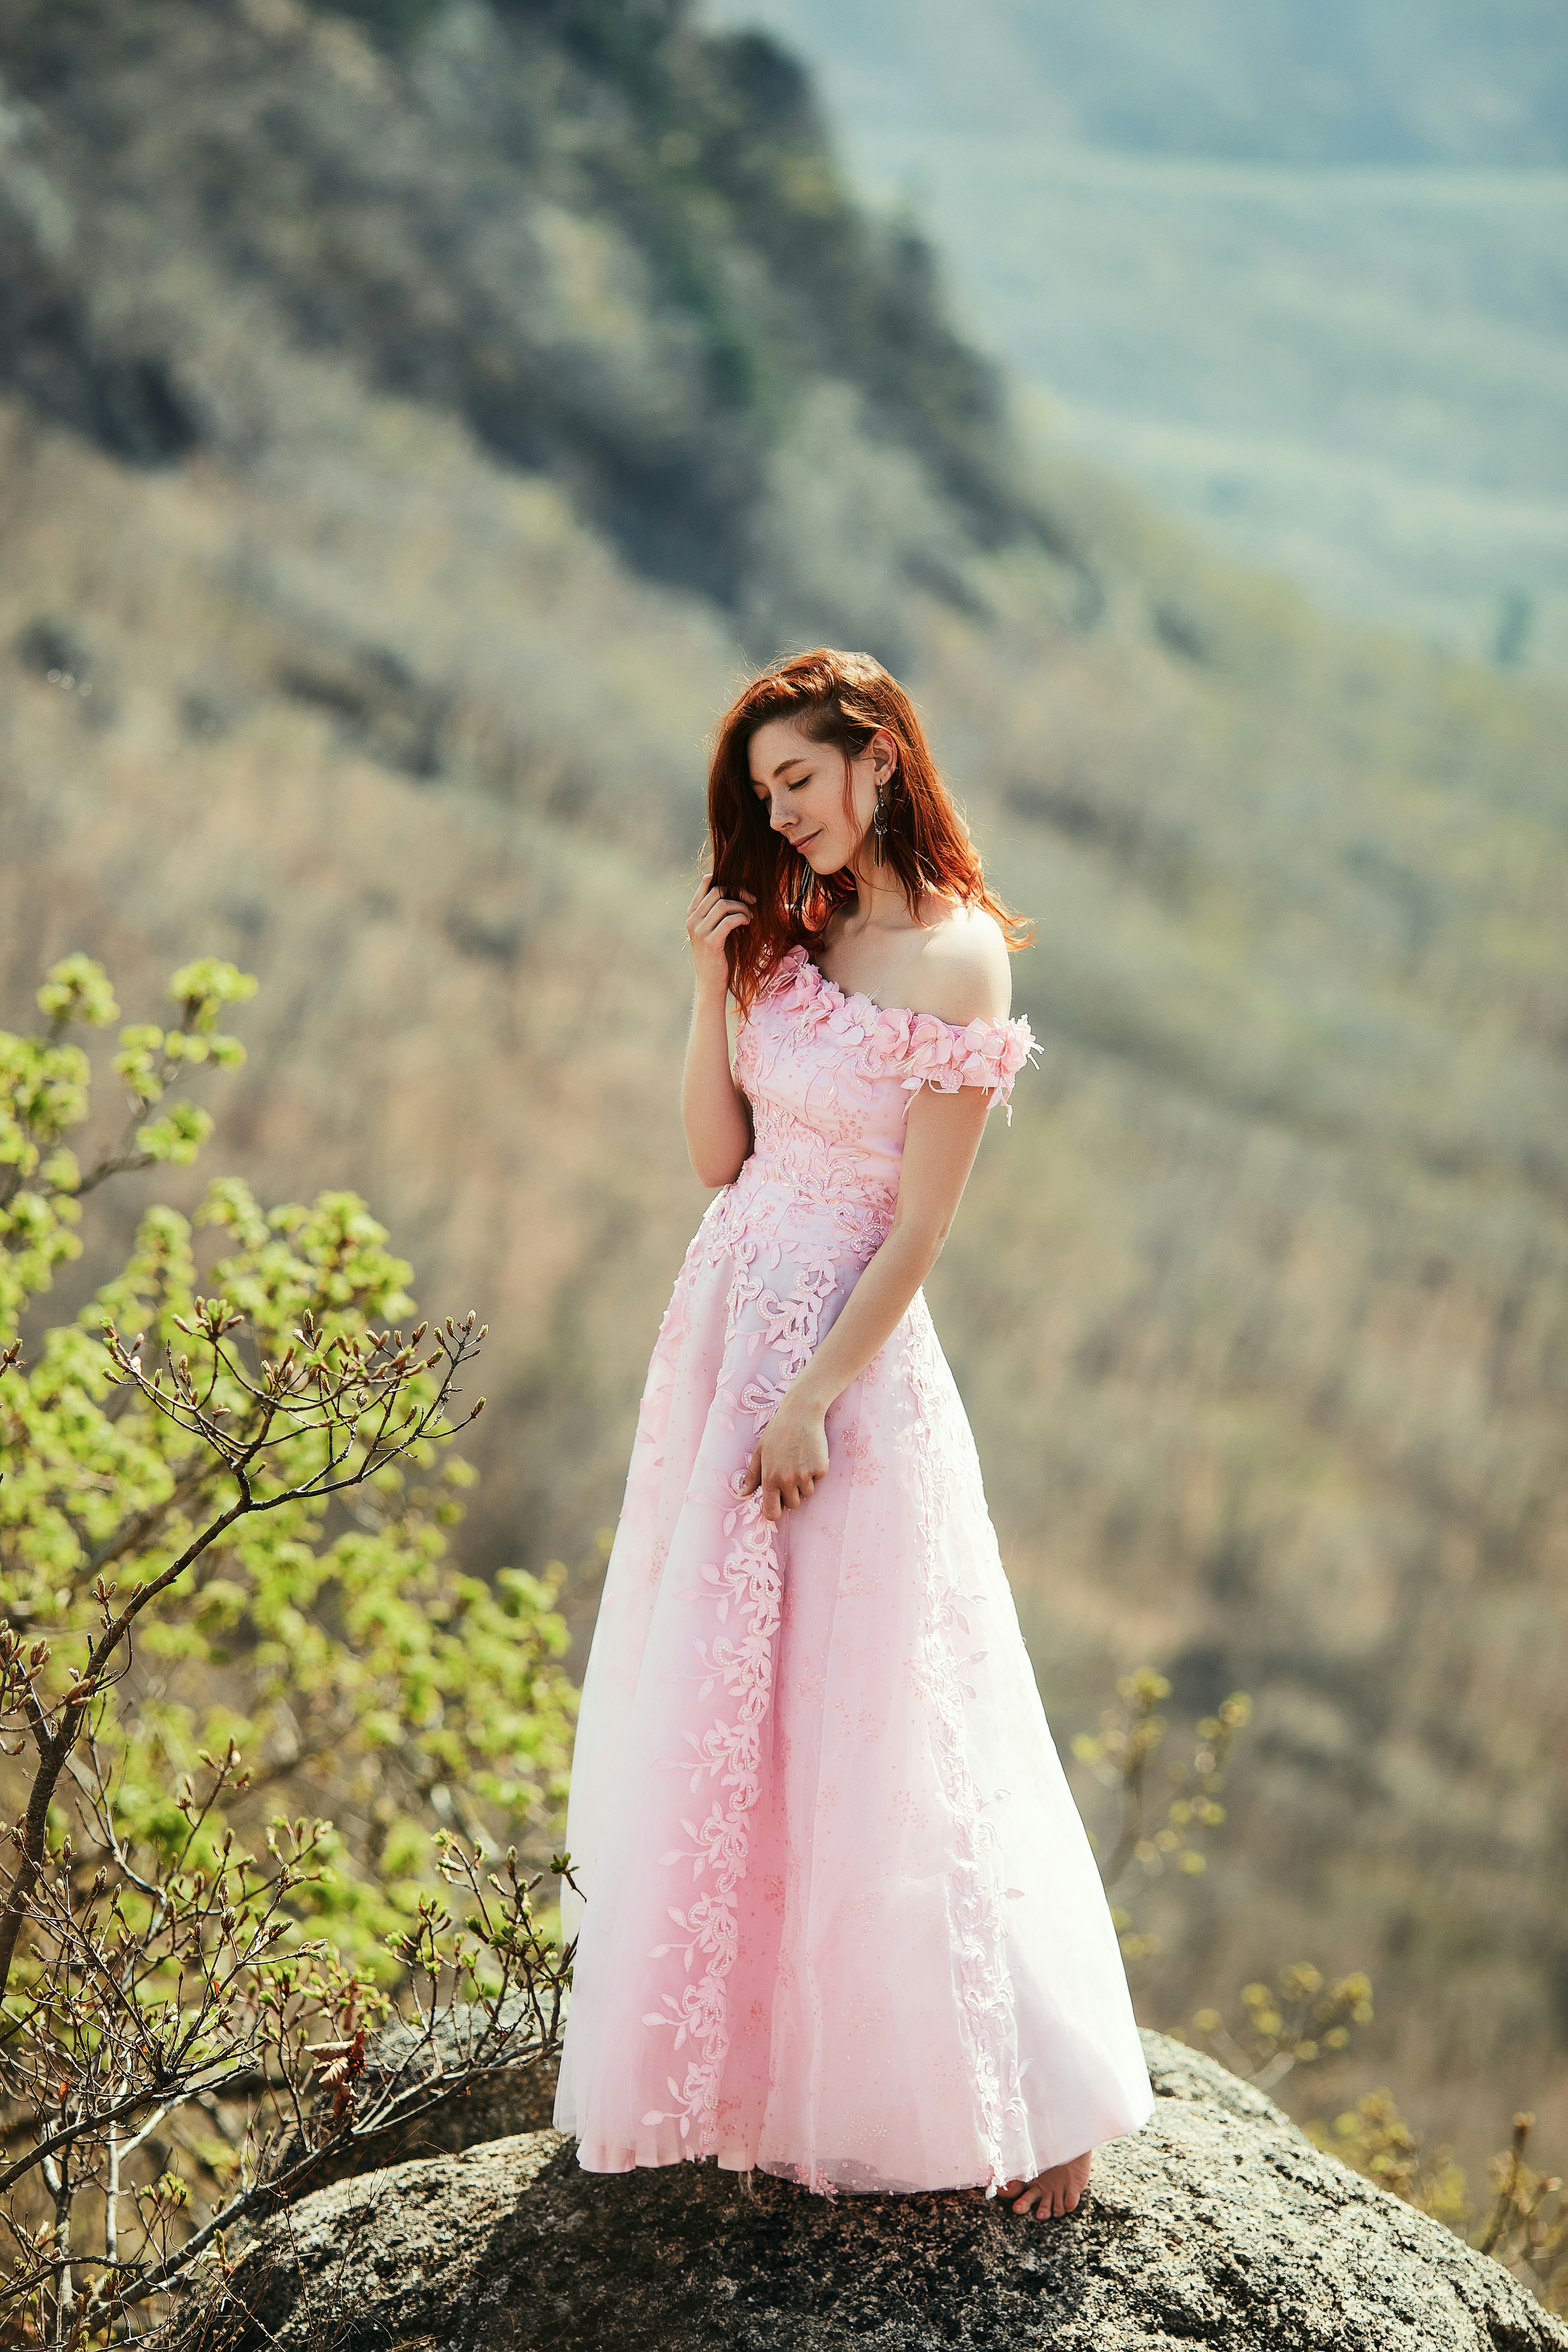 woman in pink dress standing near green tree during daytime